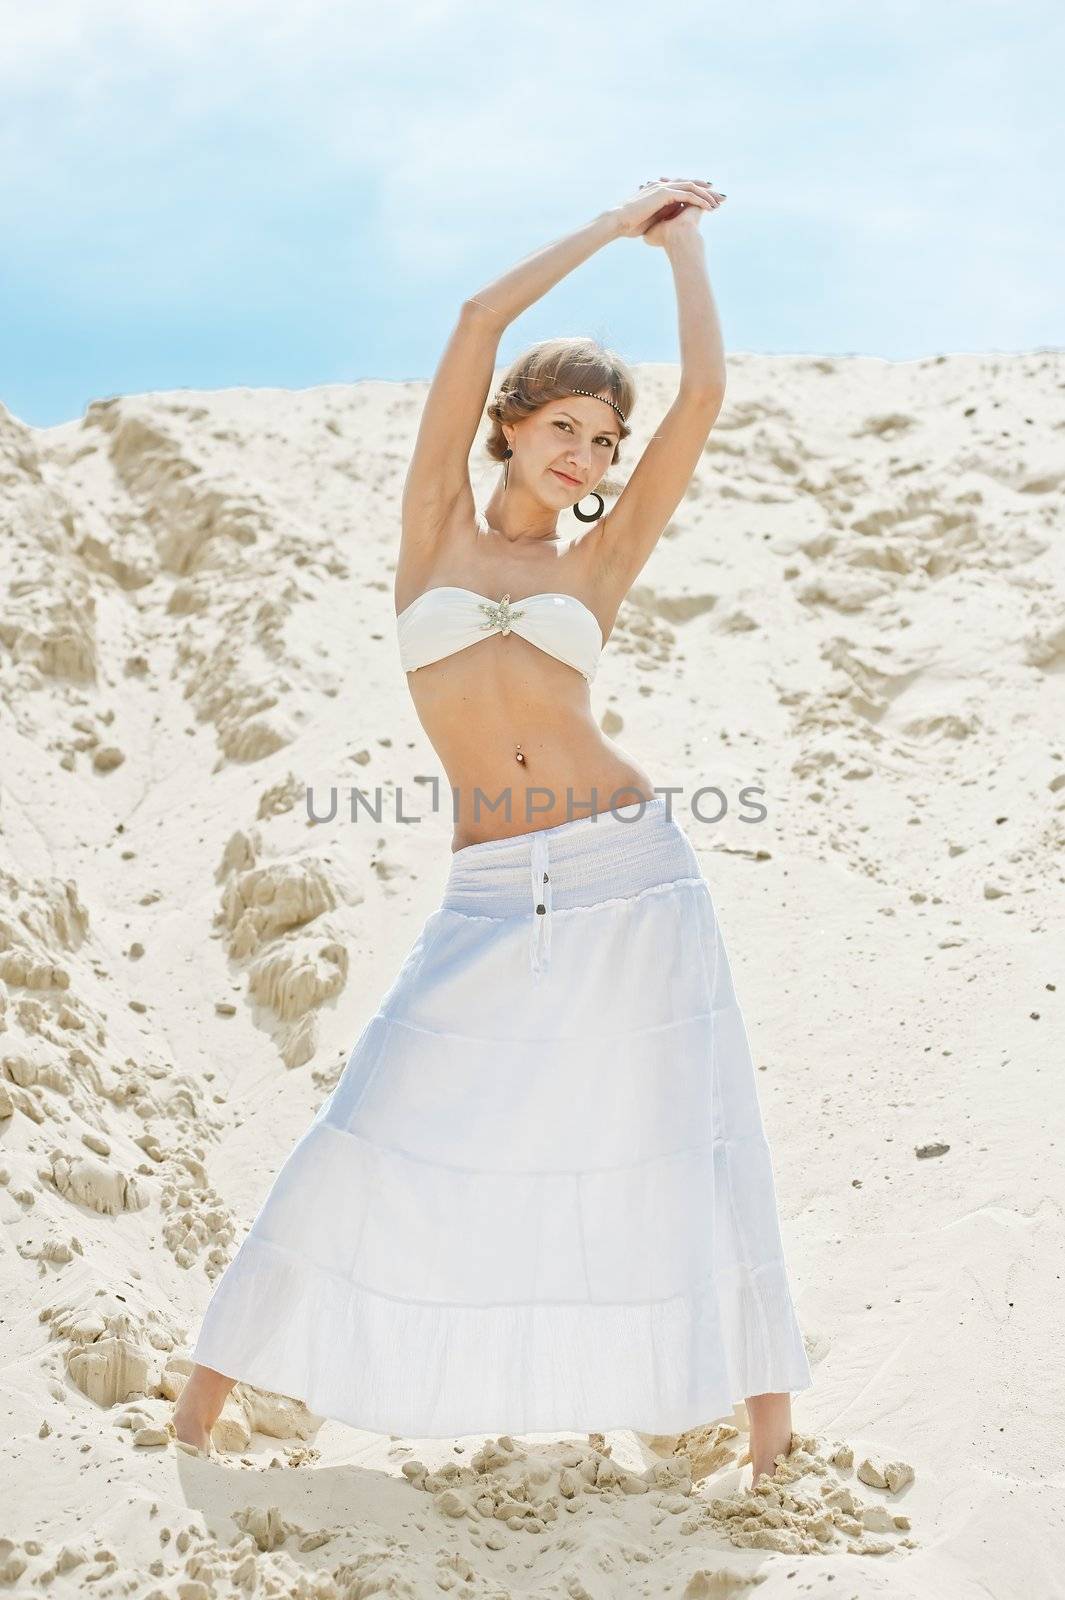 beautiful girl in a white skirt posing on a sand dune